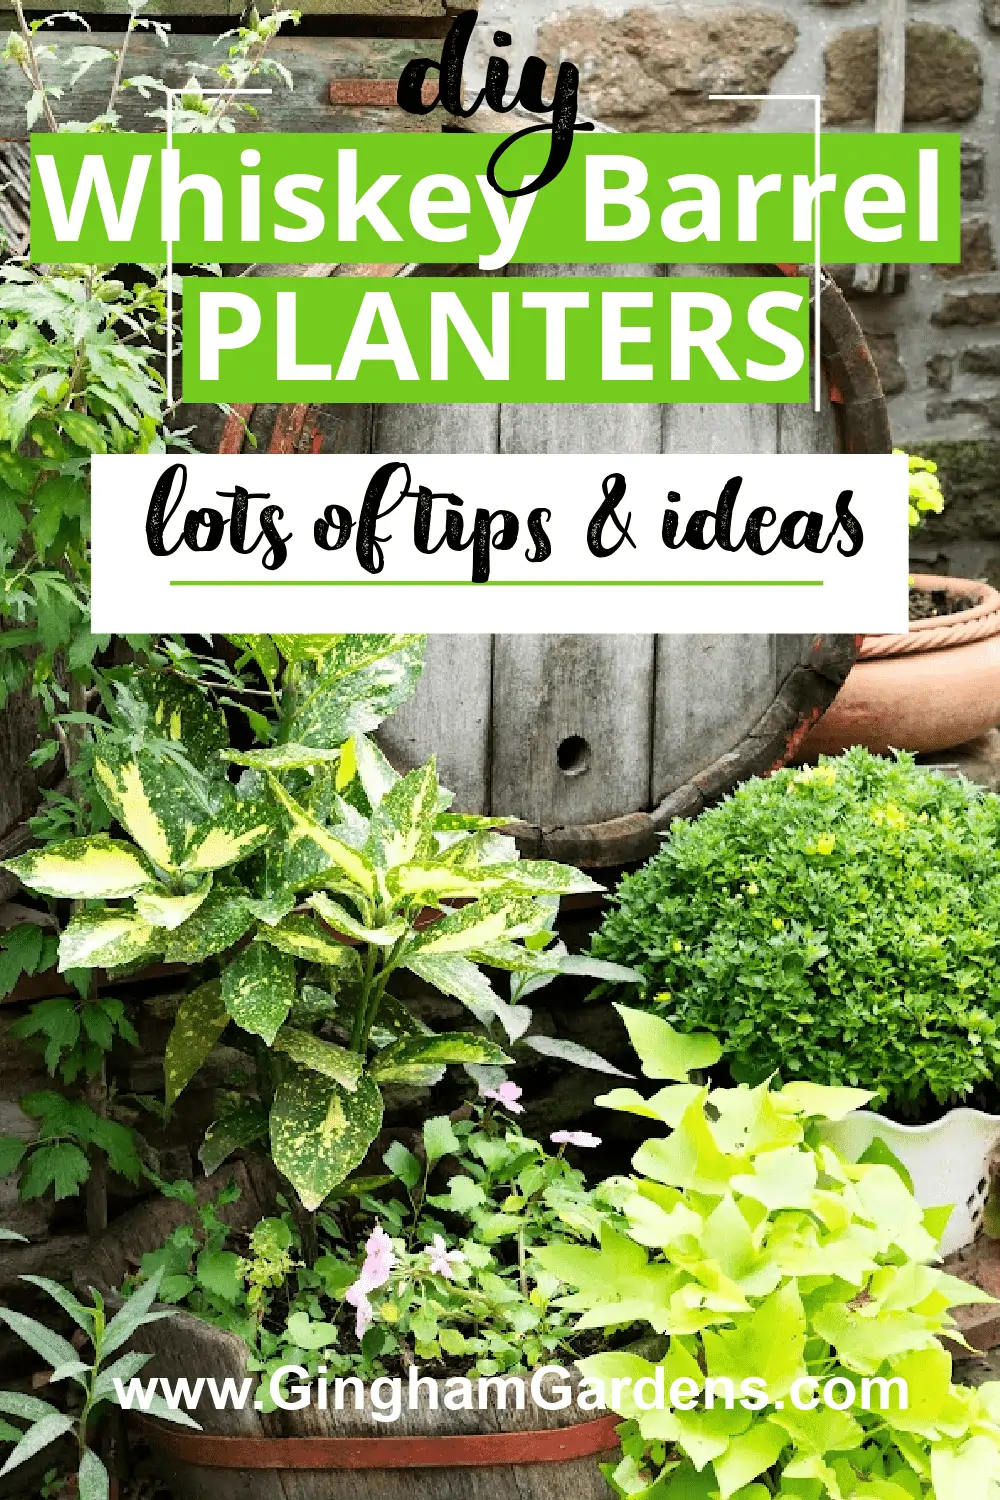 Image of whiskey barrel and plants with text overlay Whiskey Barrel Planters lots of tips and ideas